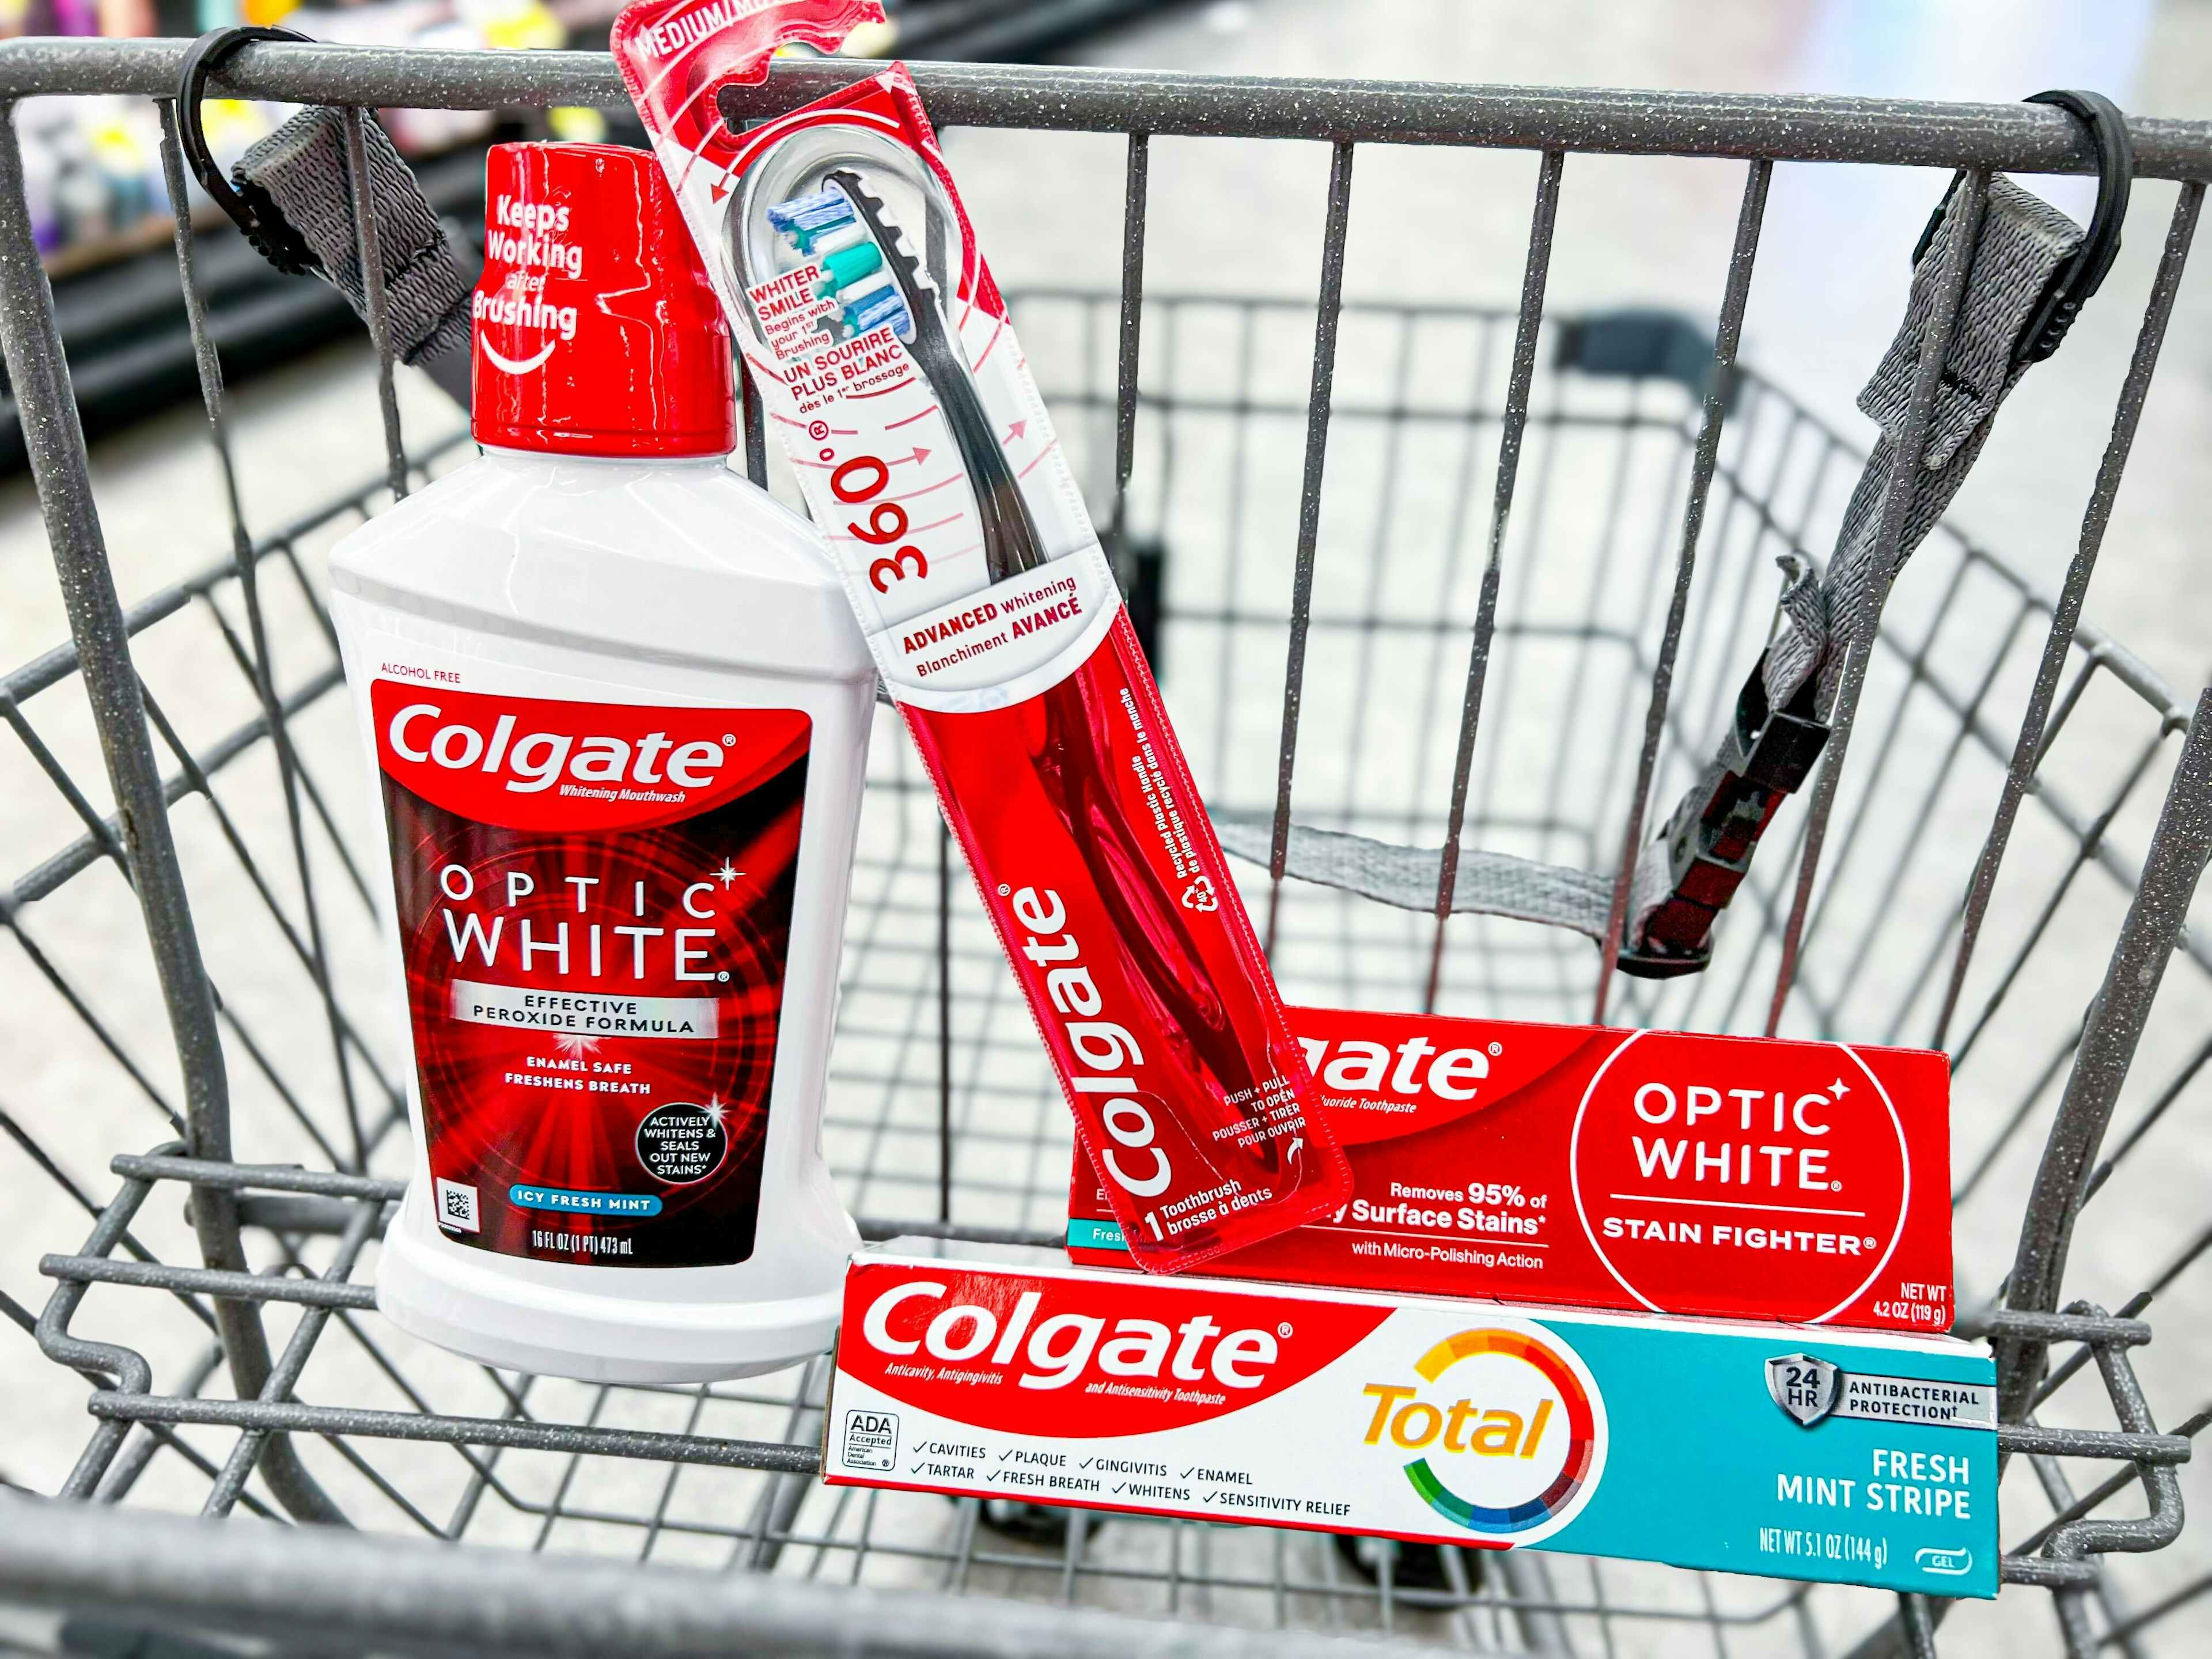 walgreens colgate toothpaste, mouthwash and toothbrush693